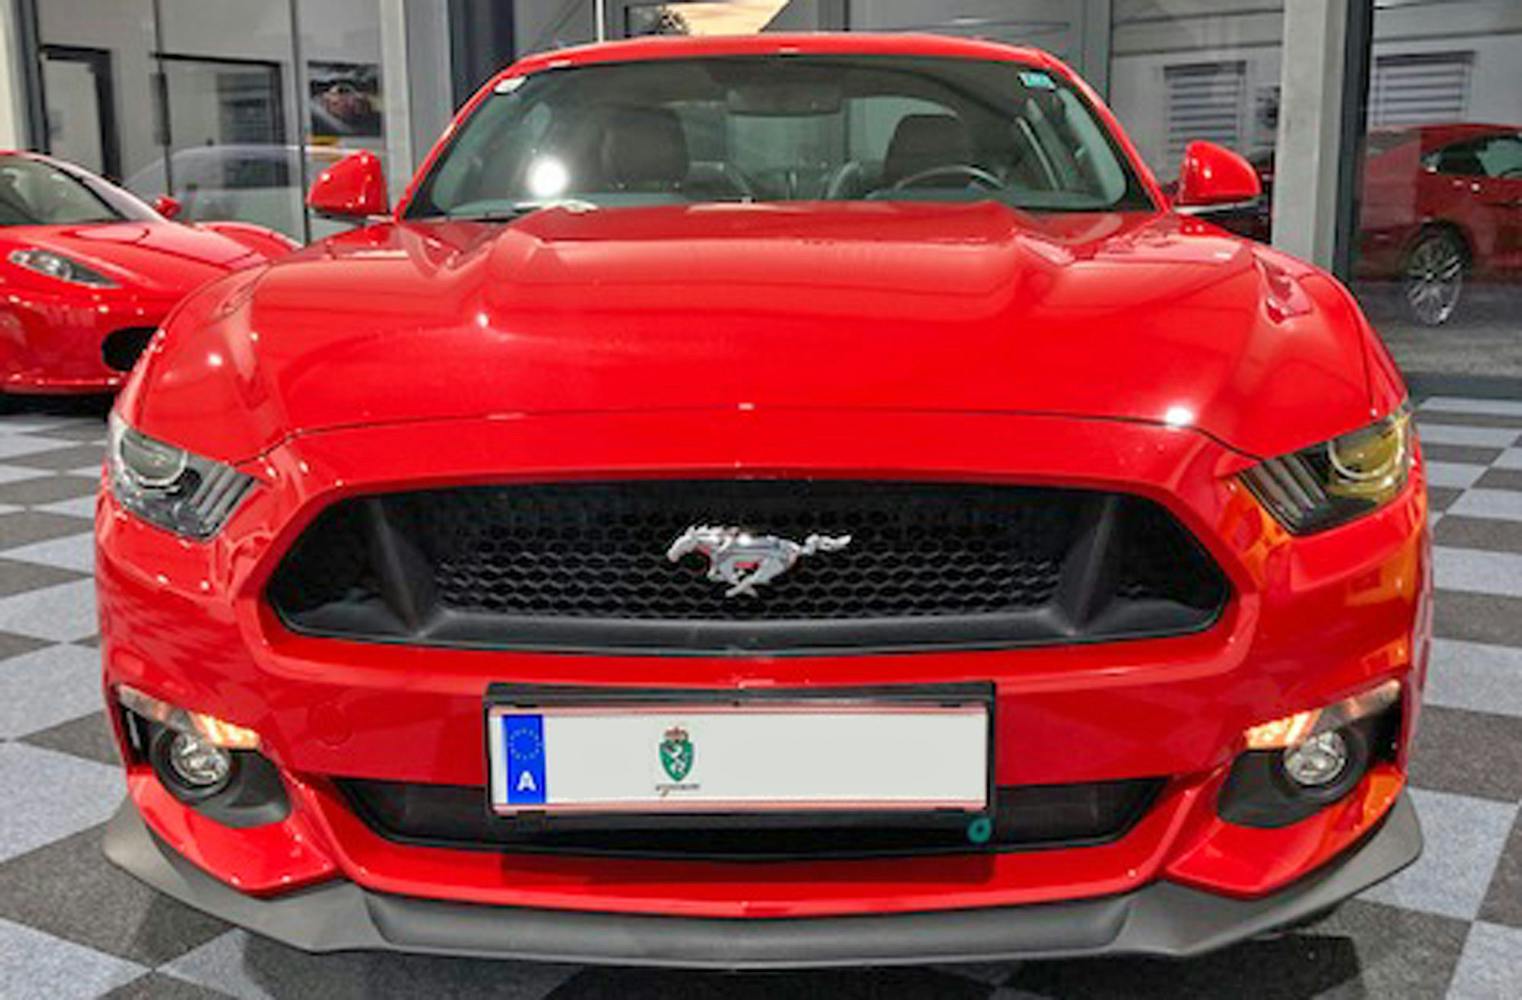 Ford Mustang GT V8 mieten | US-Legende mit 421 PS | 1 Tag